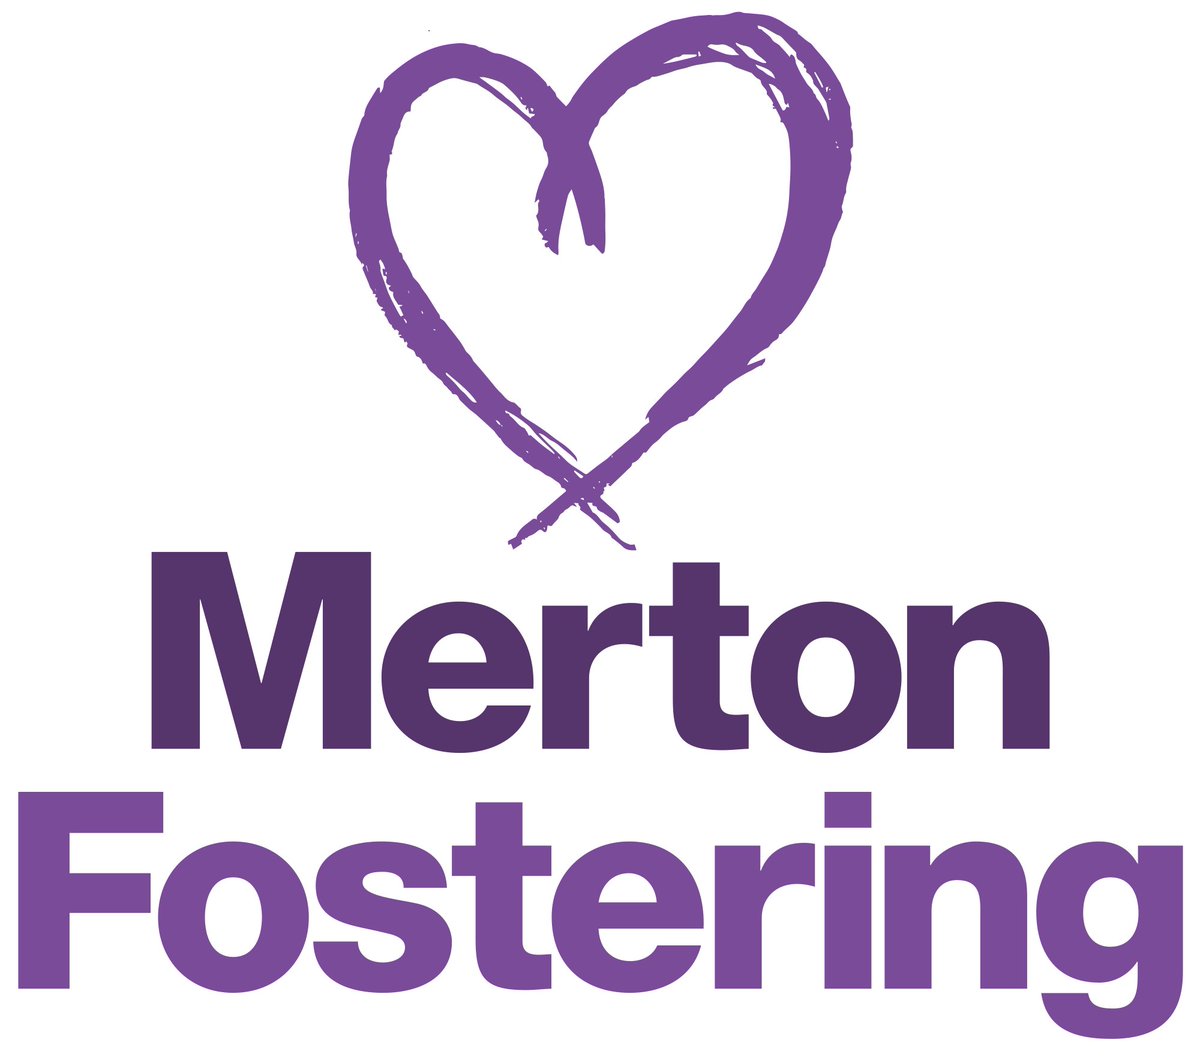 We urgently need foster carers for unaccompanied asylum-seeking children. If you have room in your home and heart get in touch today. Find out more ow.ly/RMLt50OlhCv #mertonfostering #FosterCareFortnight